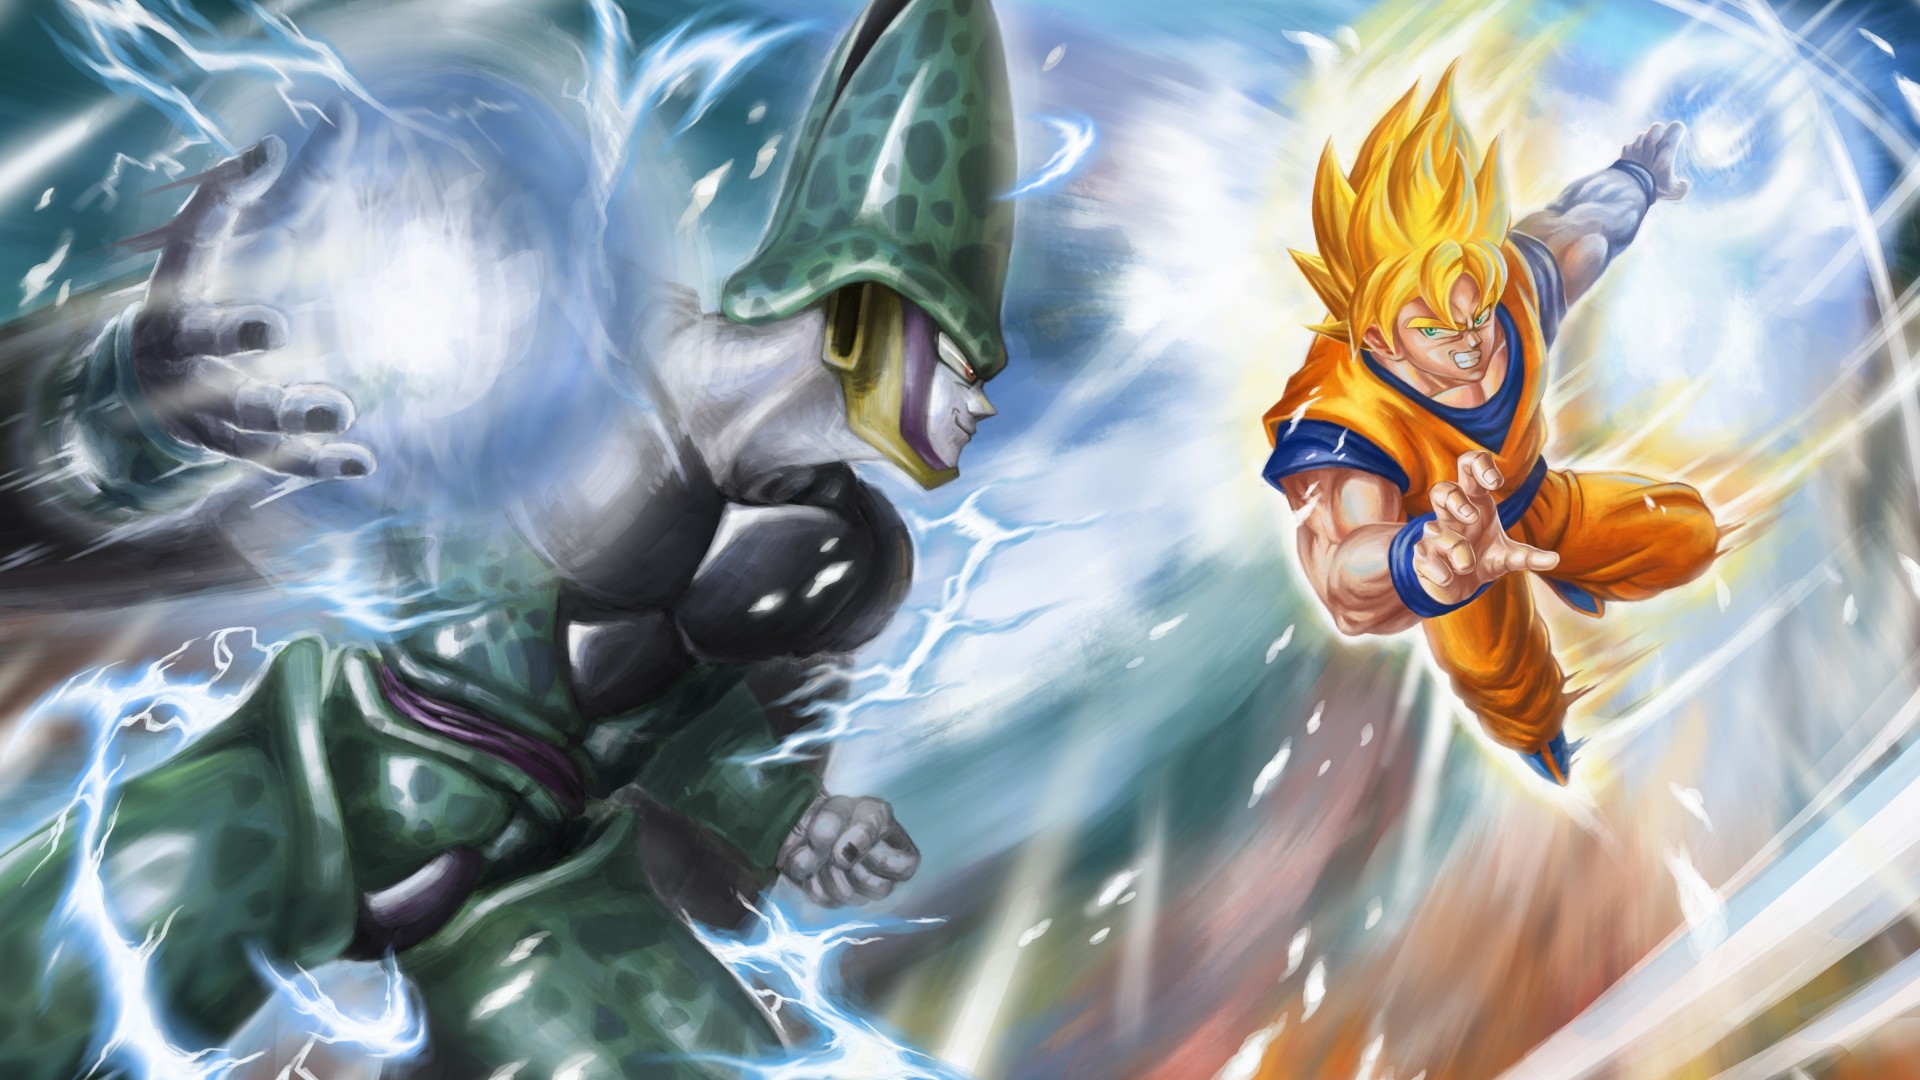 1920x1080 SSJ Goku vs Perfect Cell - Another well choreographed fight in Dbz. and the  shock of Goku forfeiting the match to Cell and passing the torch to Gohan.